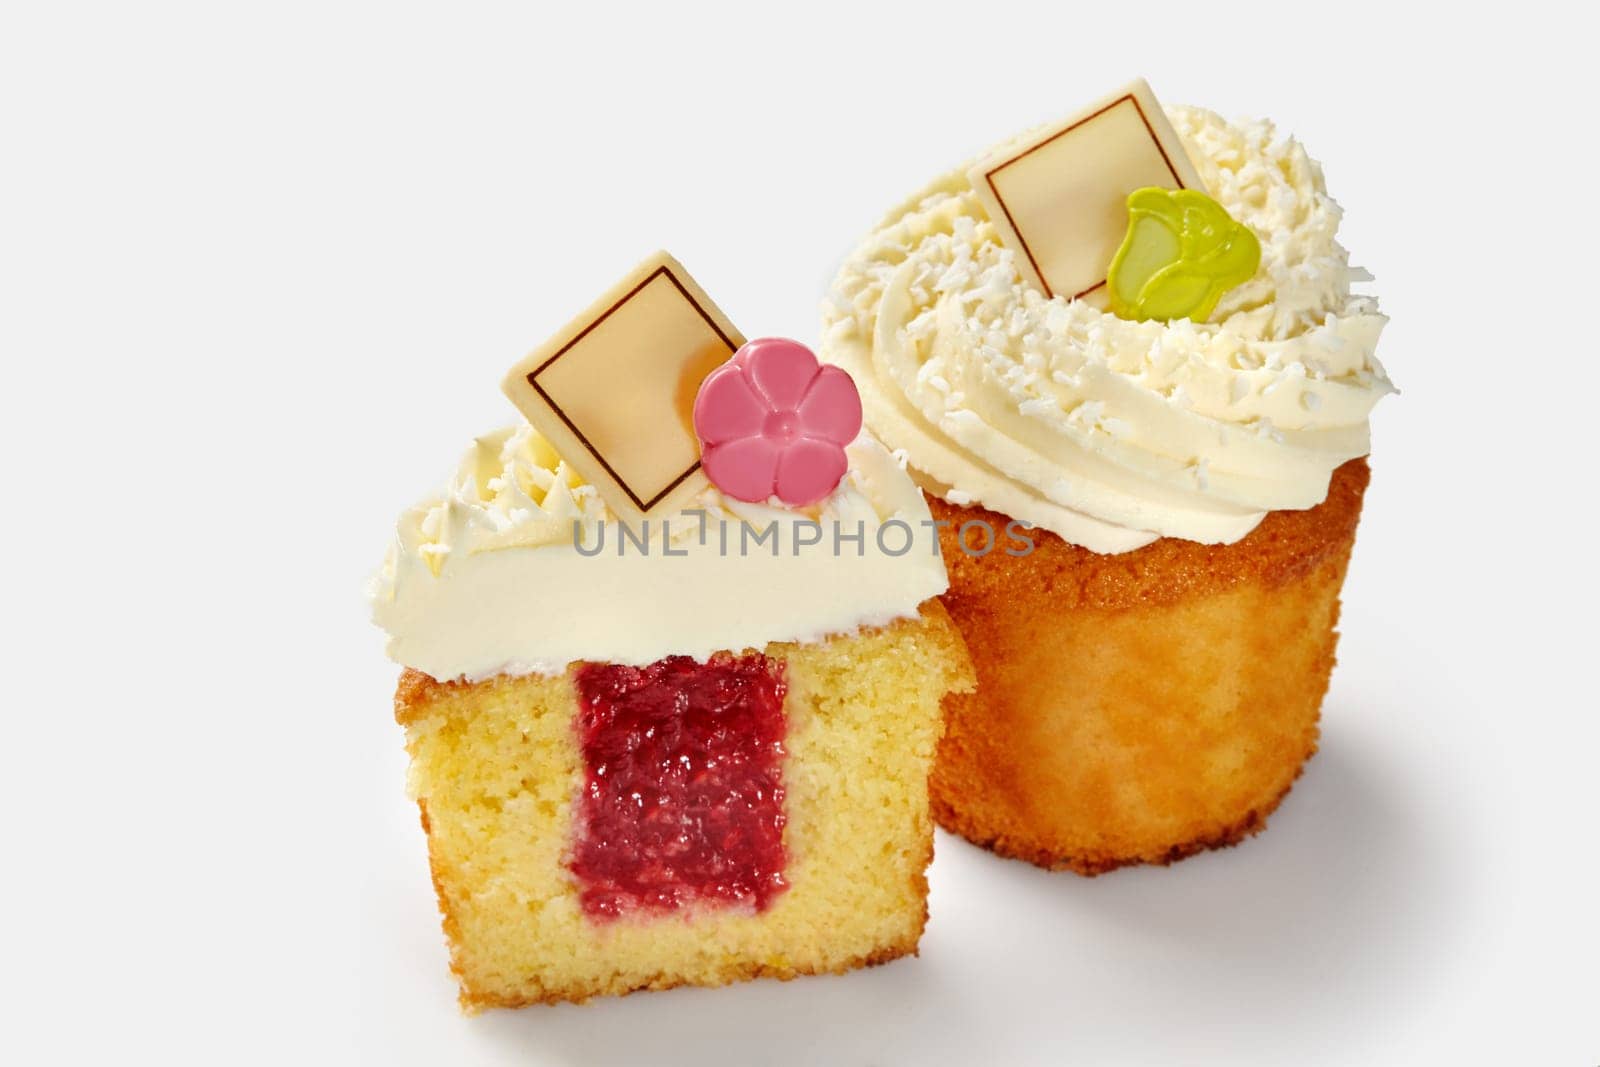 Appetizing whole and sliced fluffy vanilla cupcakes with raspberry filling topped with swirls of whipped cream sprinkled with coconut shavings and chocolate plates. Popular baked desserts